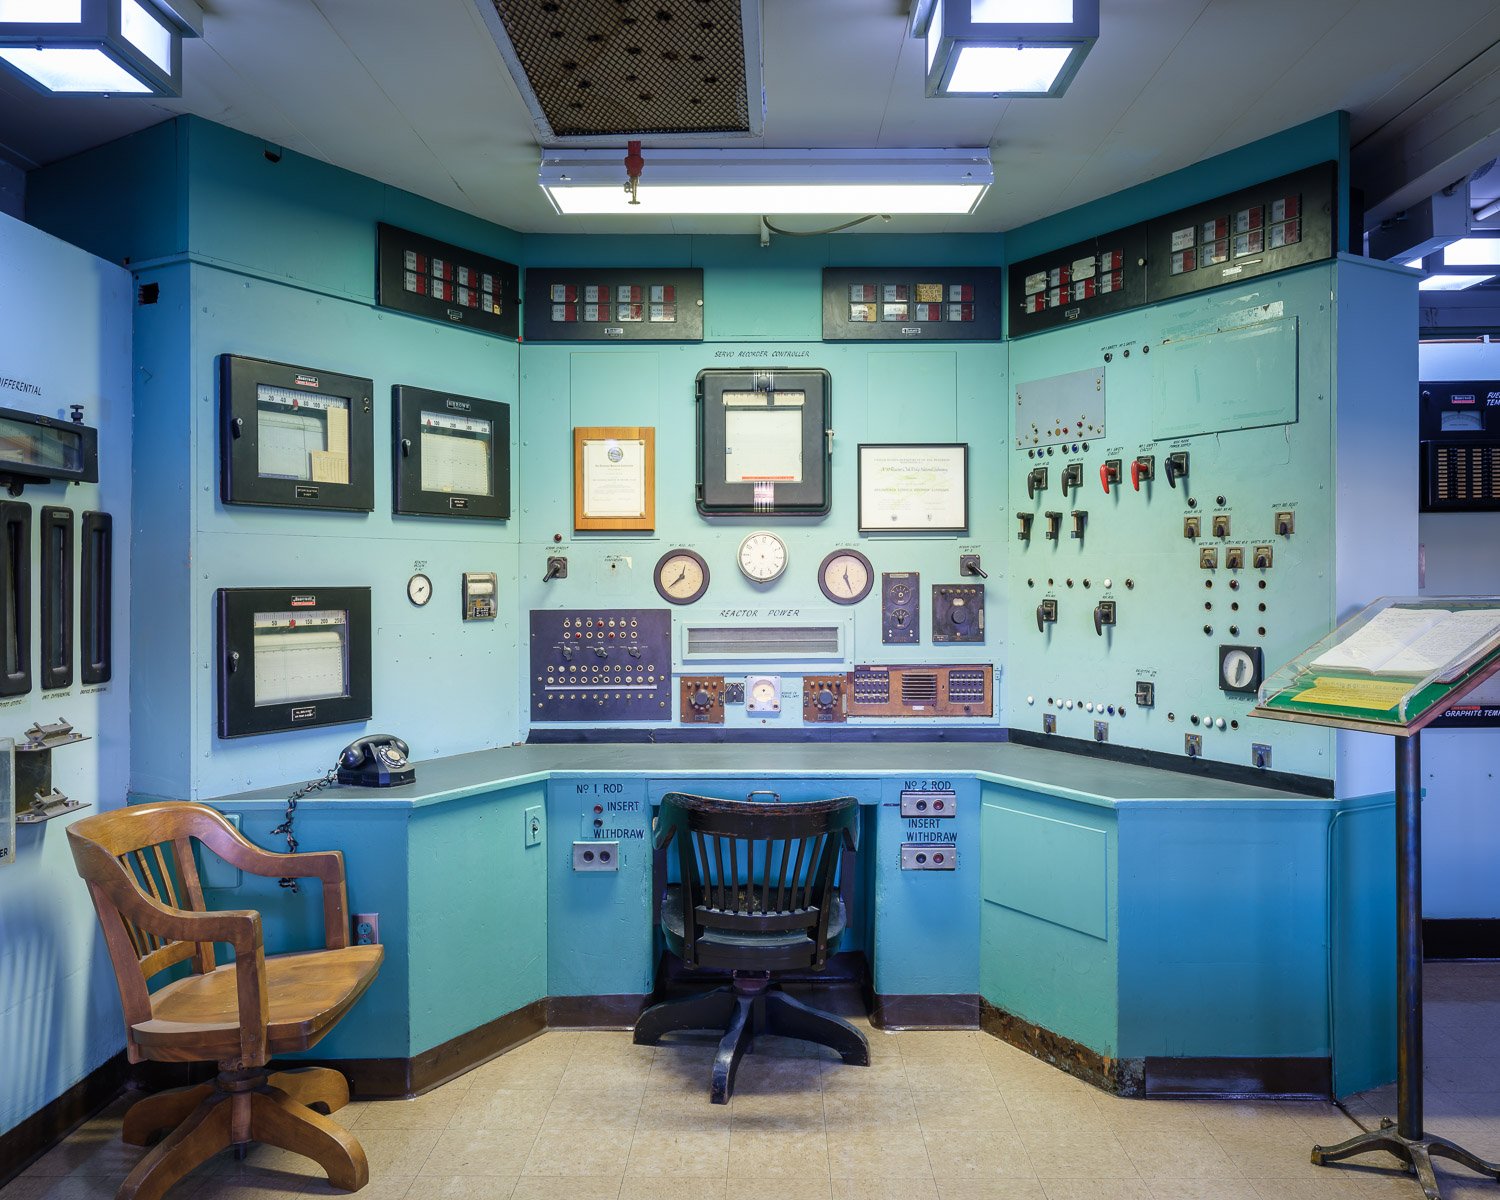  The control room of the oldest nuclear reactor in the world, the X-10 Graphite Reactor 